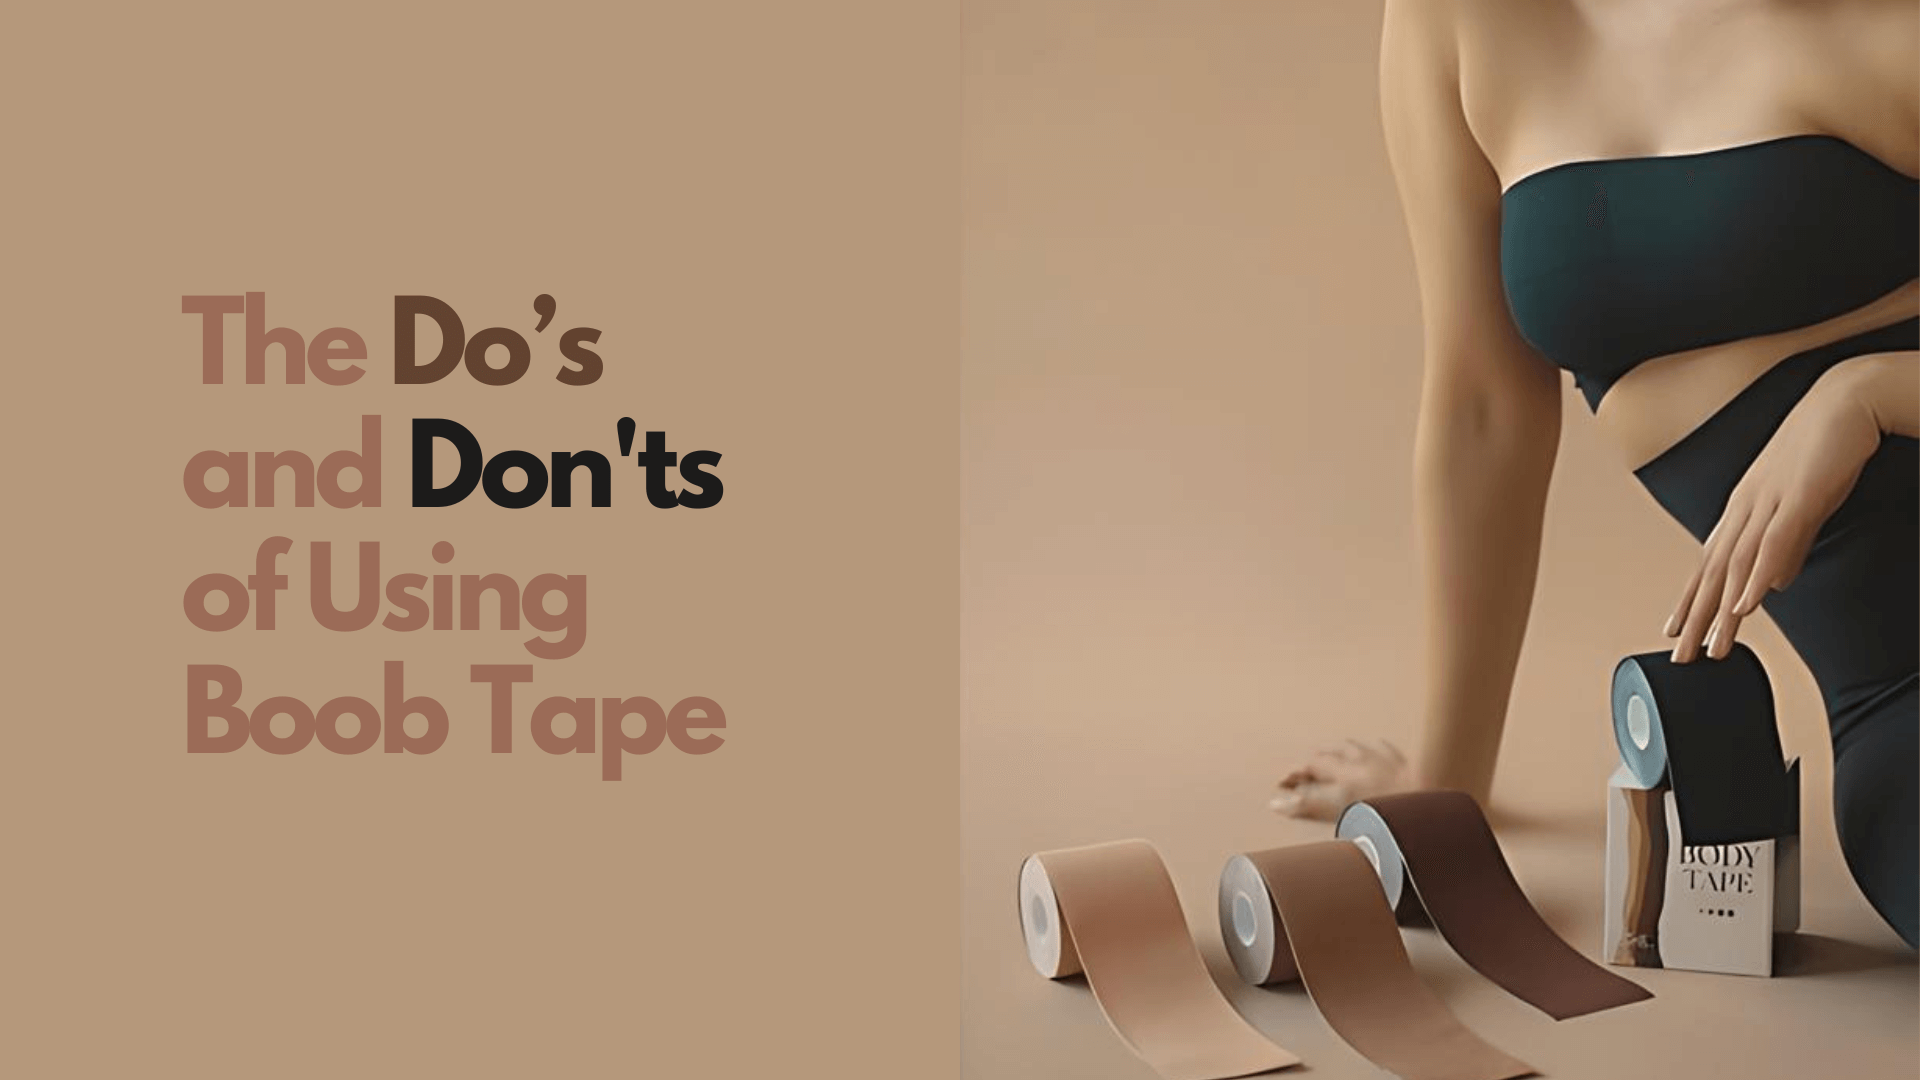 The Dos and Don'ts of Using Boob Tape